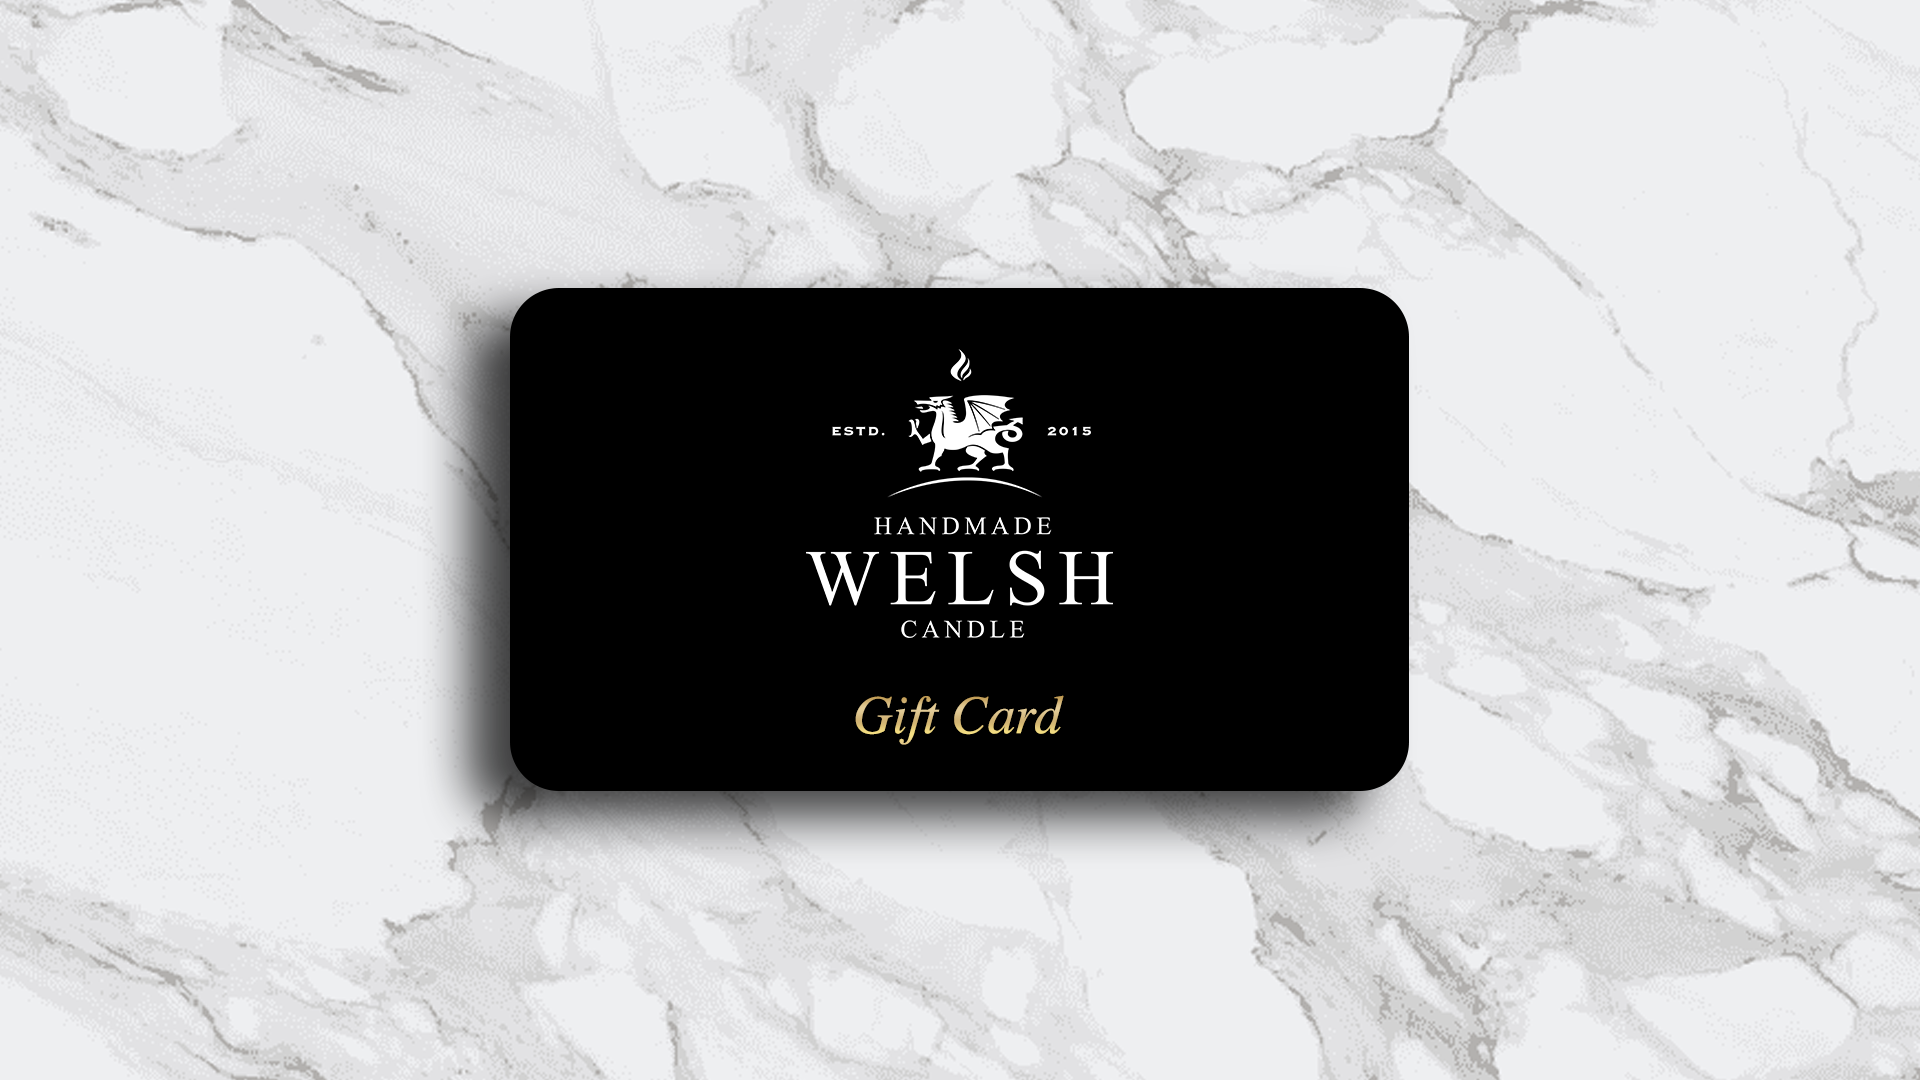 Handmade Welsh Candle Gift Card